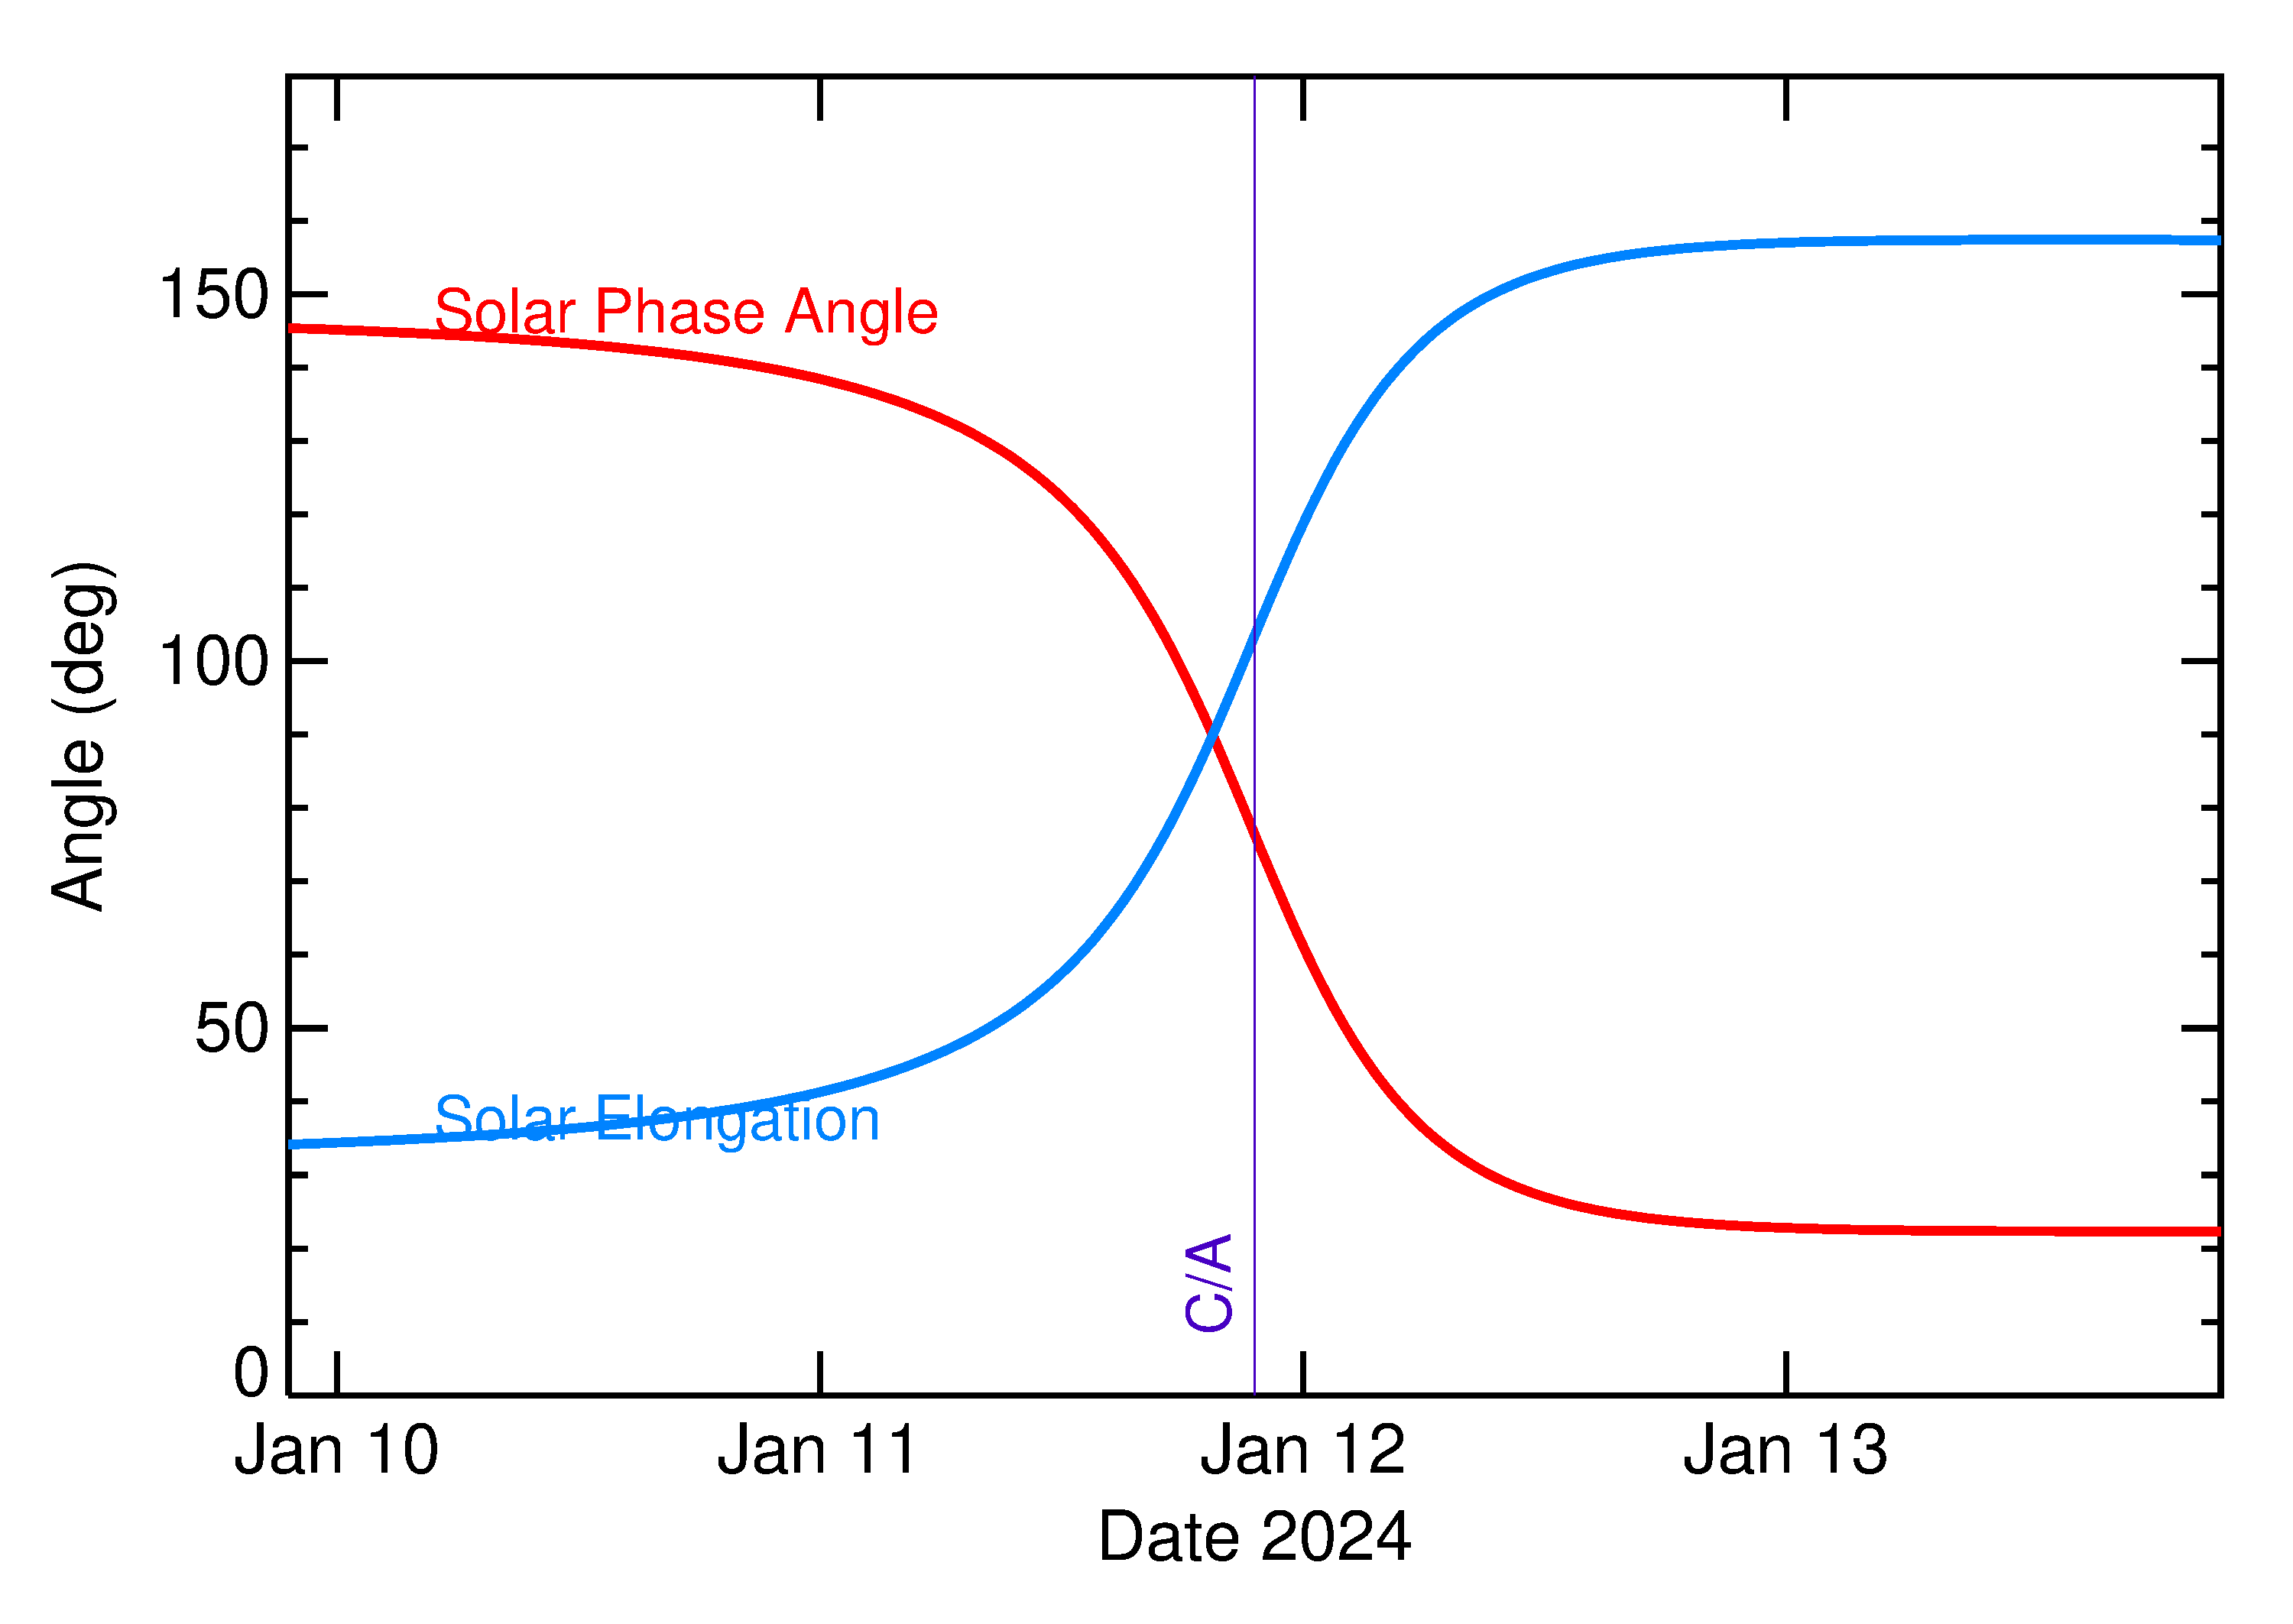 Solar Elongation and Solar Phase Angle of 2024 AG4 in the days around closest approach